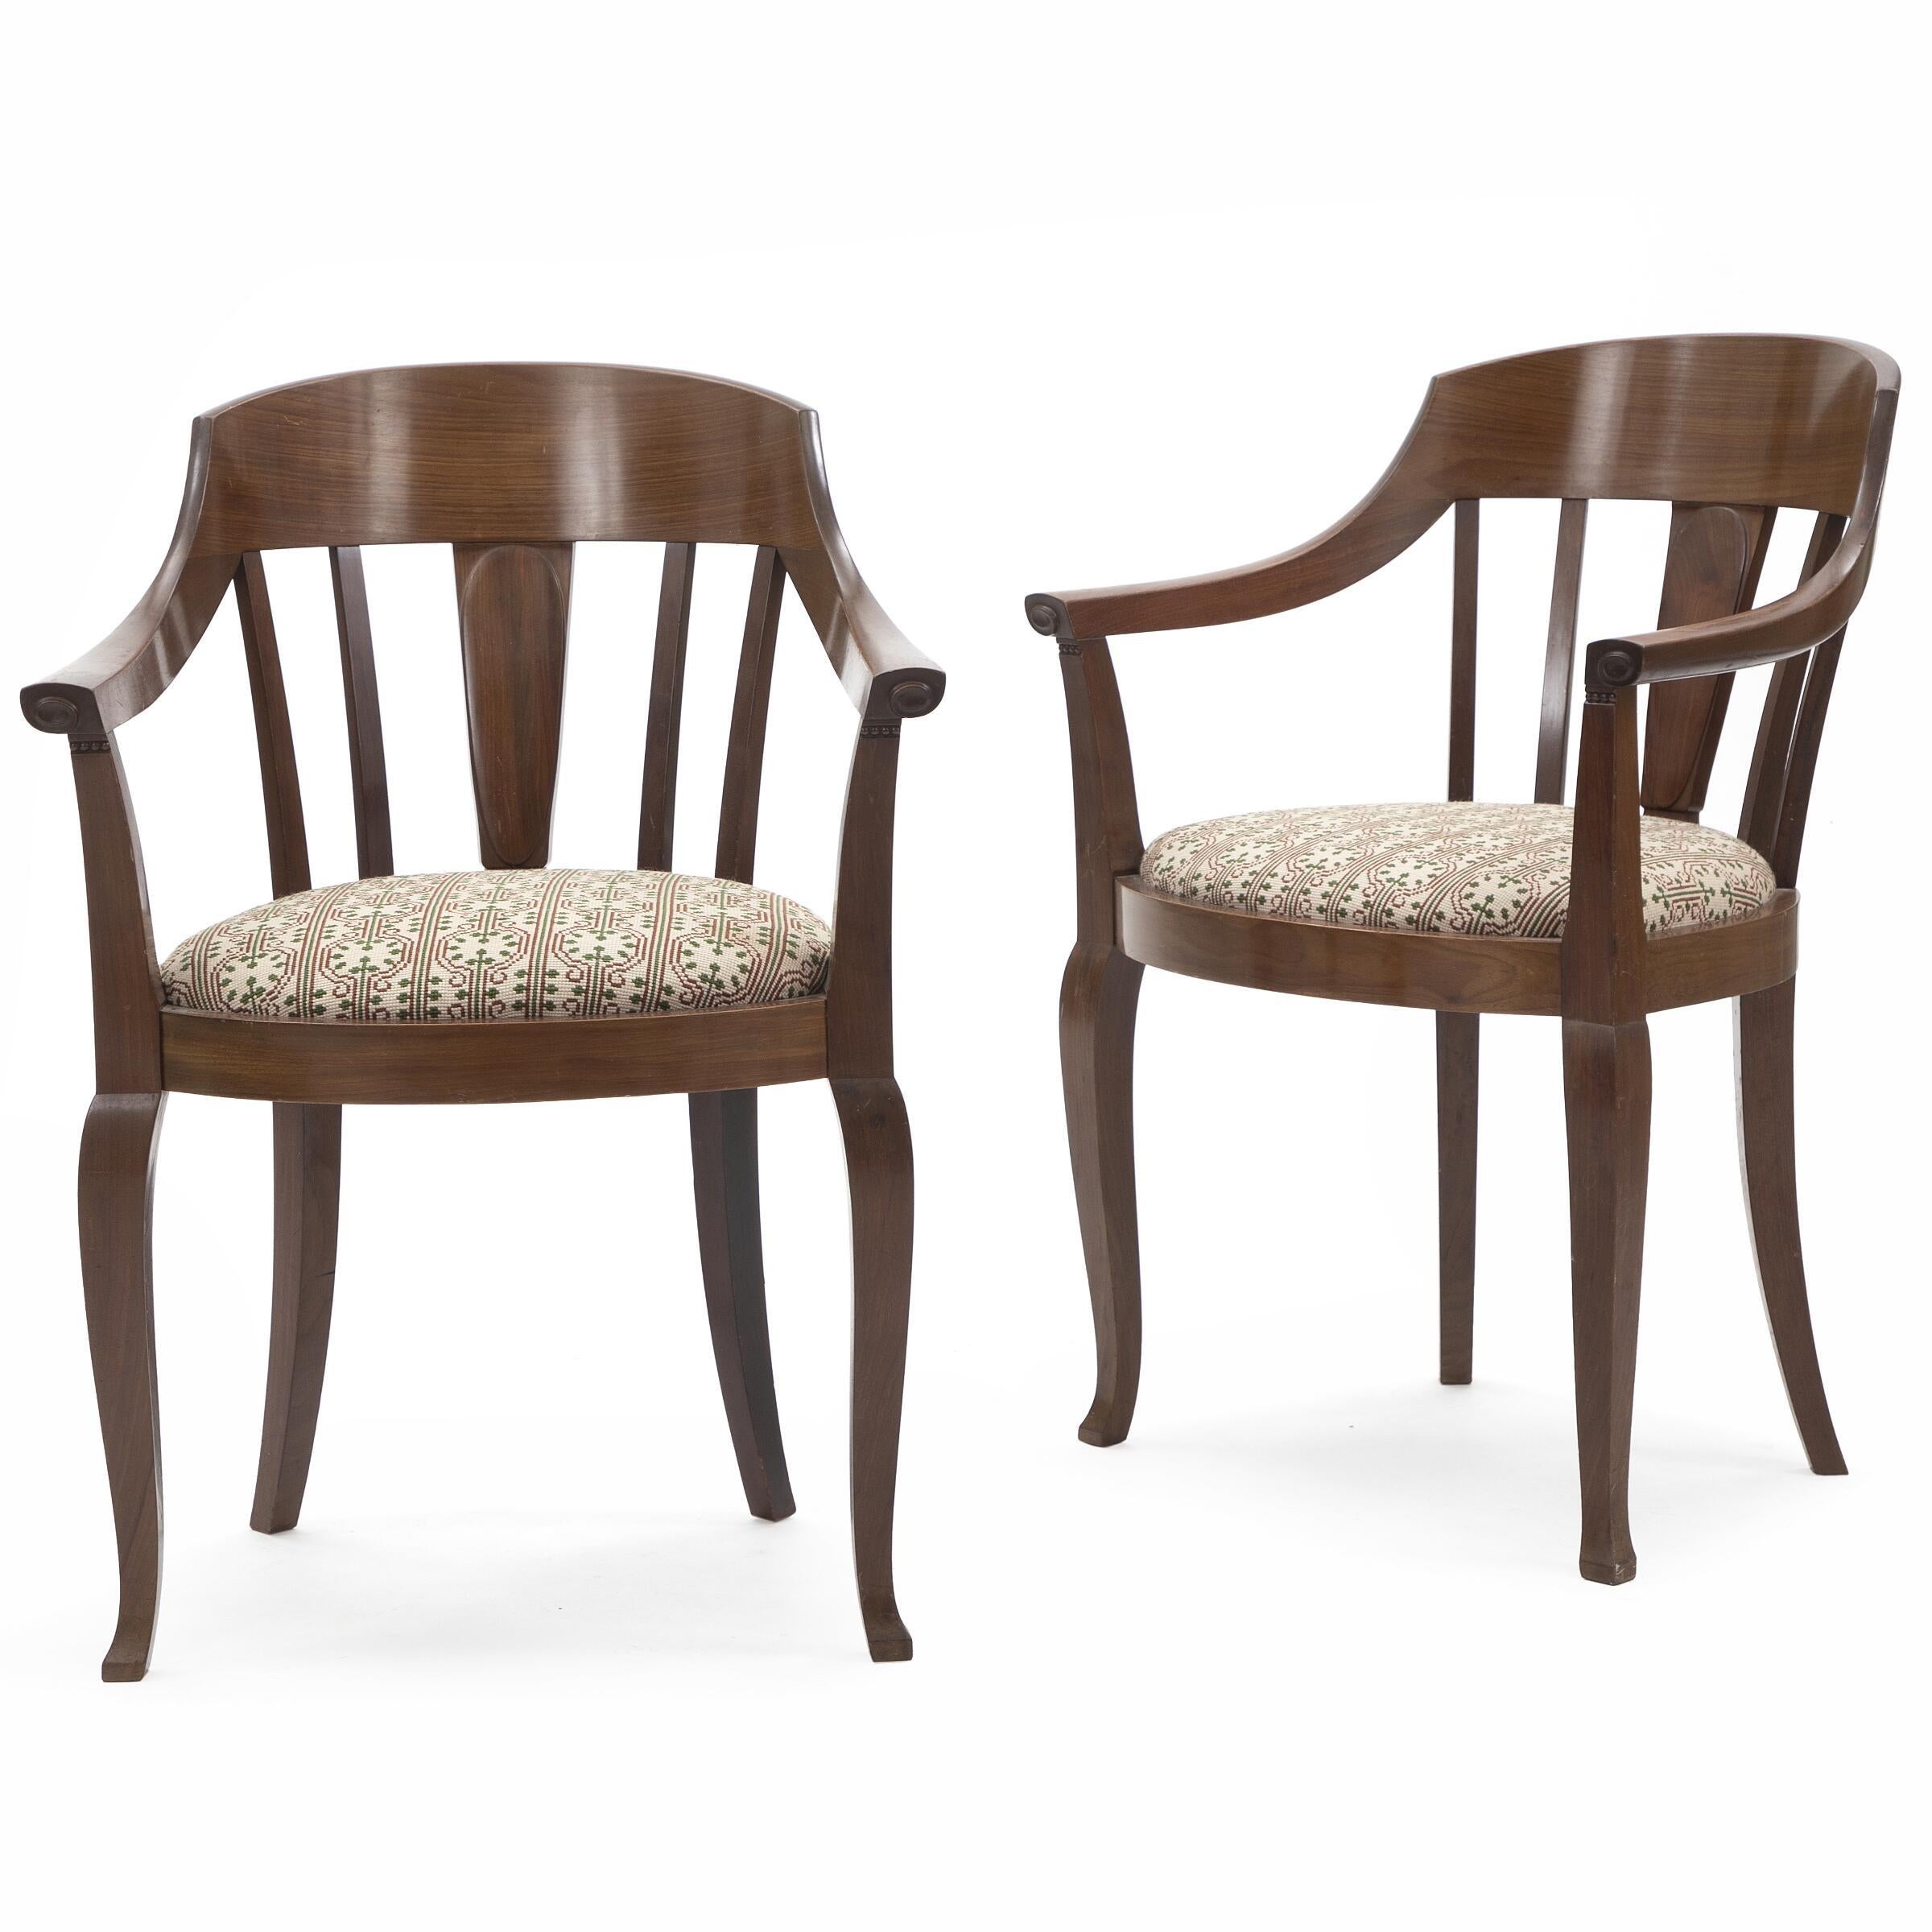 Johan Rohde A pair of chairs with mahogany frames. Seat upholstered with embroidered wool. Performed approx. 1900–10.

Mirjam Gelfer-Jørgensen writes in her ground-breaking book 'Furniture with Meaning':

'Towards a new modernism - Johan Rohde's